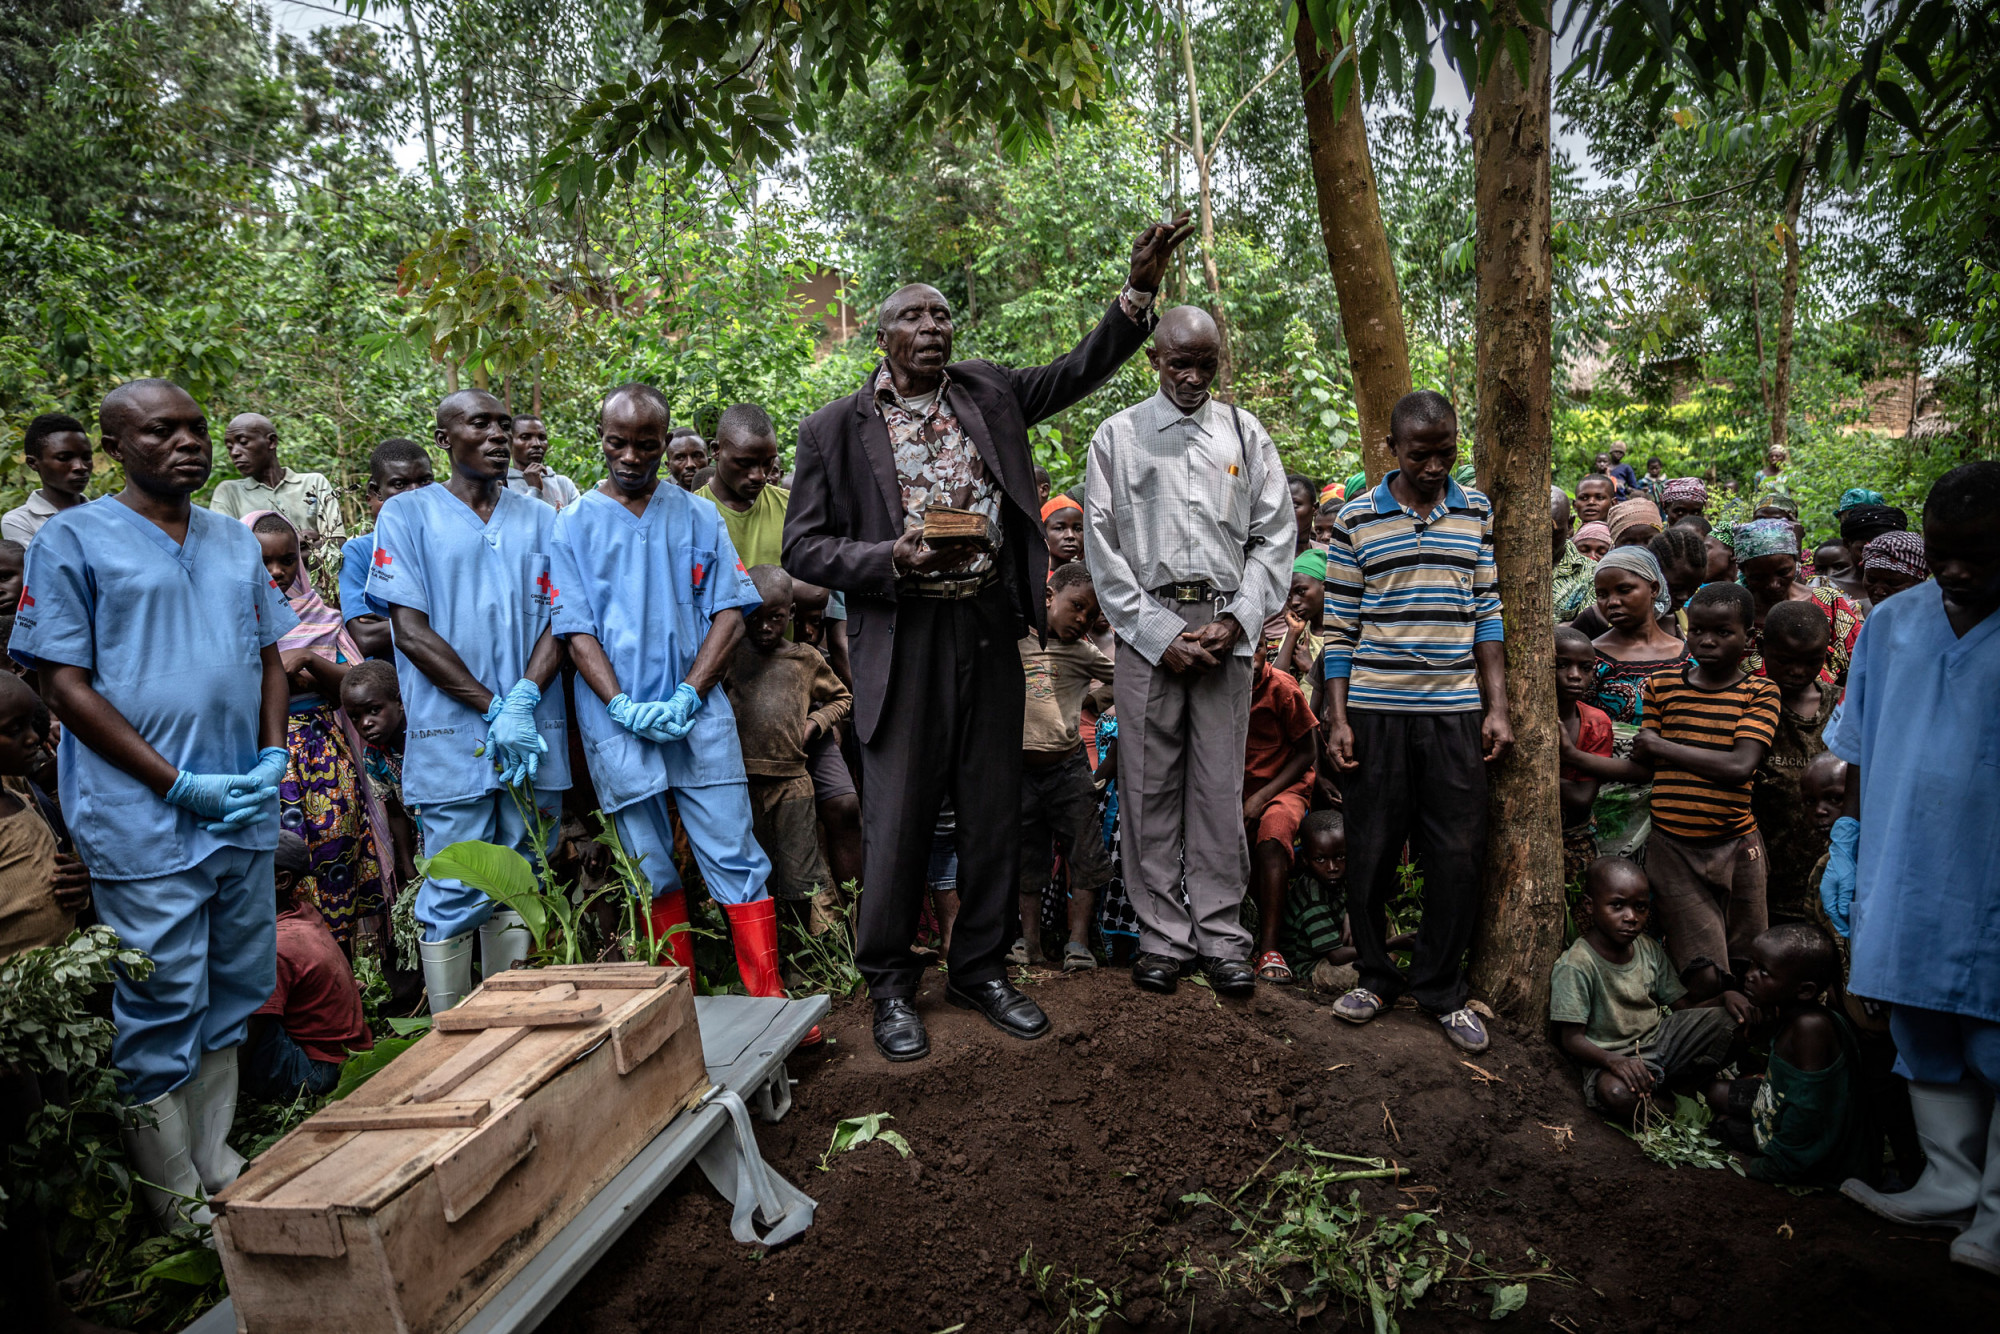 Rutshuru, North Kivu Province, February 2020. Red Cross burial workers and mourners attend the funeral of an 11-month-old girl, who died during the Ebola outbreak. © Finbarr O’Reilly for Fondation Carmignac